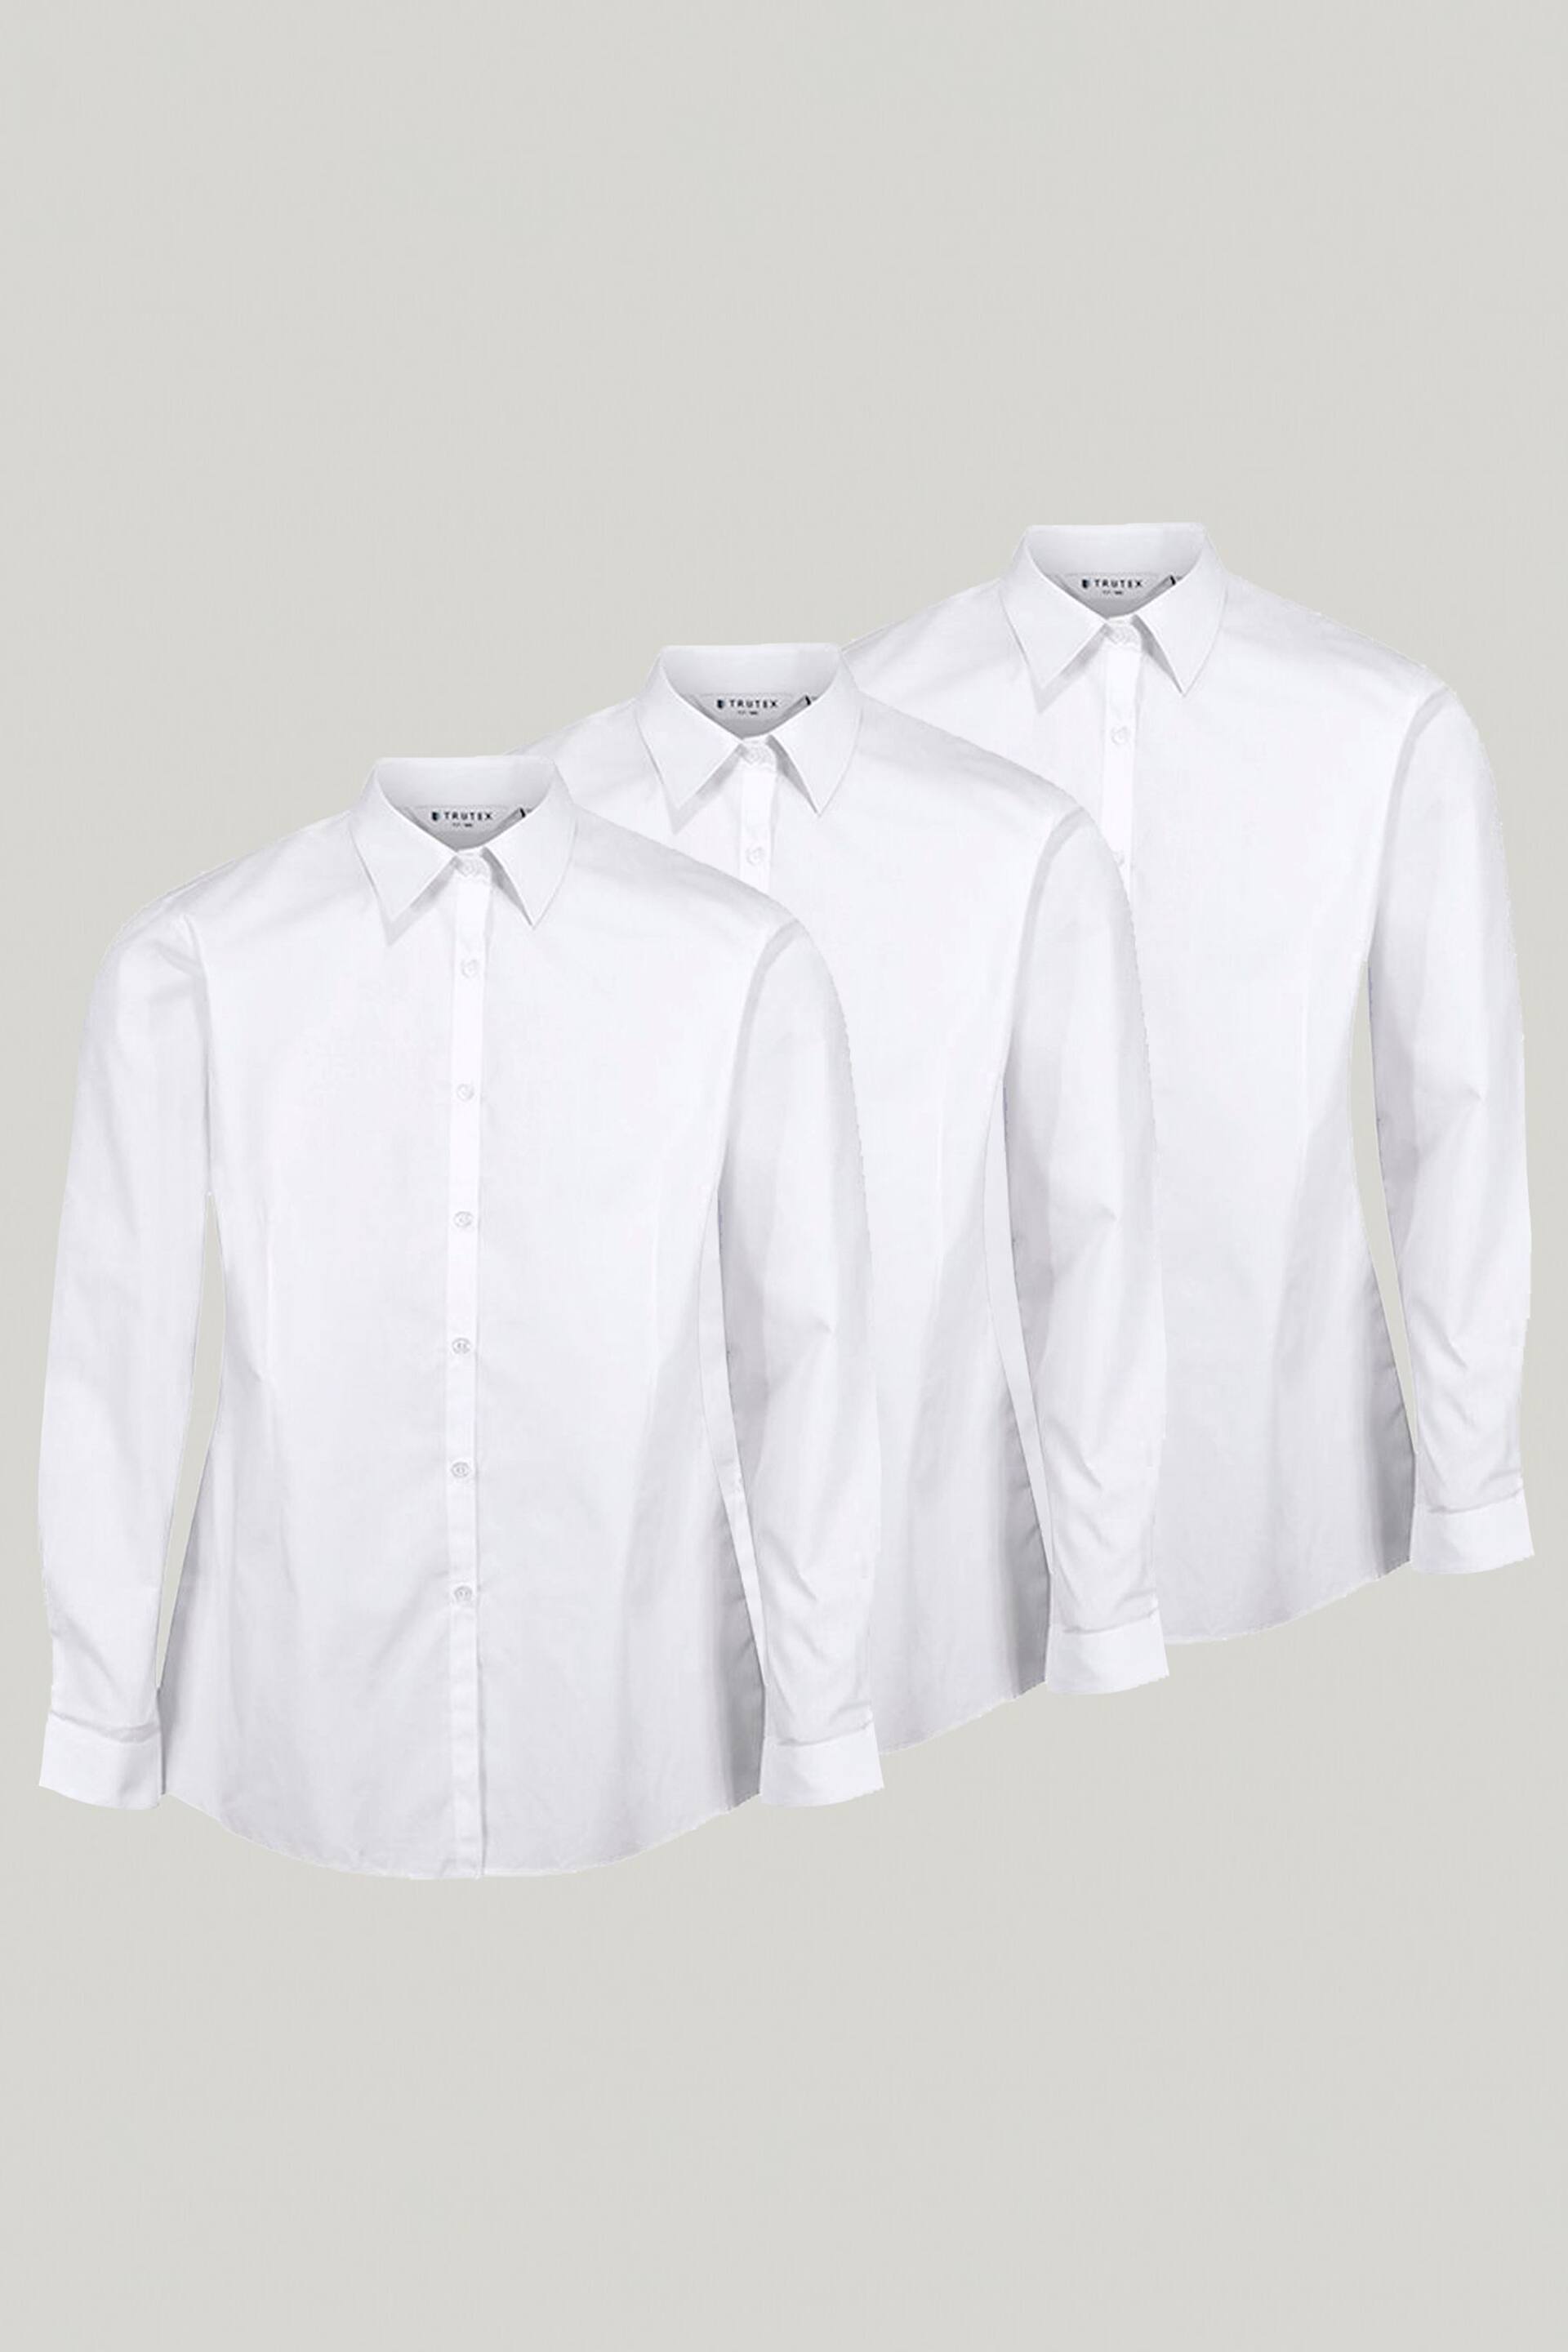 Trutex White Regular Fit Long Sleeve 3 Pack School Shirts - Image 2 of 7